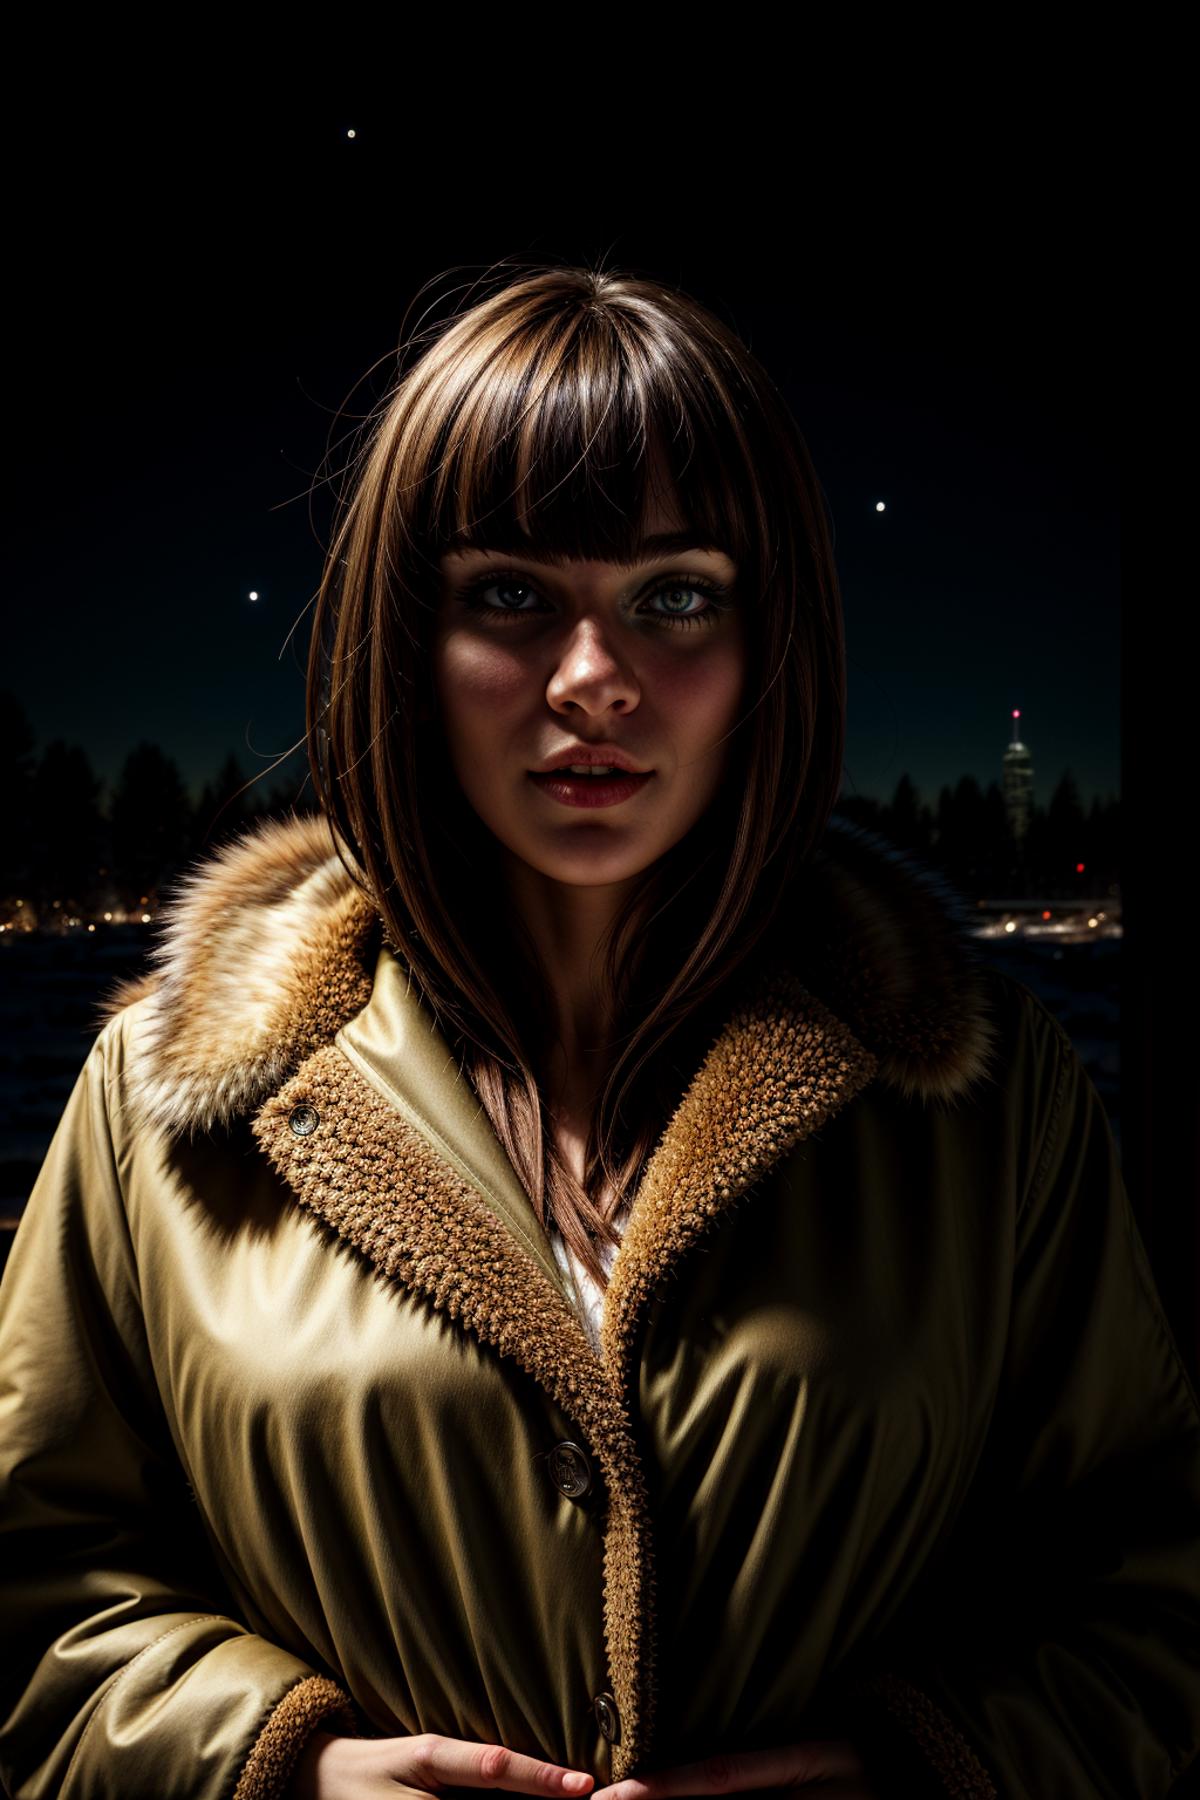 A woman with a fur trimmed jacket and brown hair posing at night.